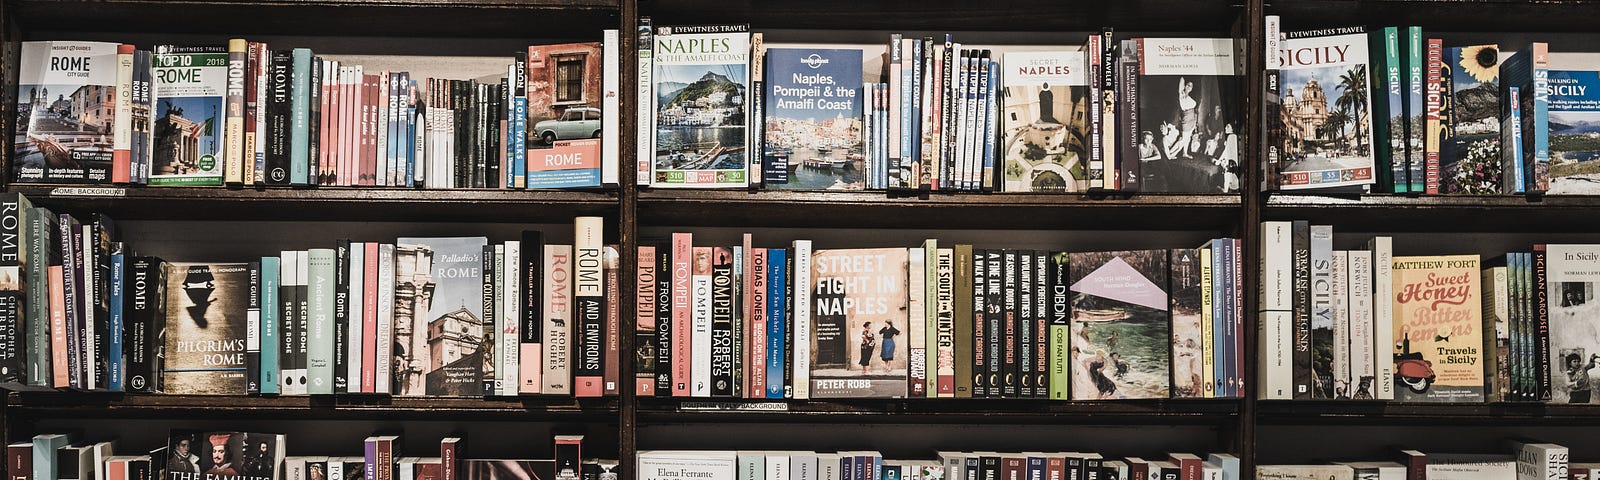 Books on shelves, with an emphasis on Roman and Italian travel and history